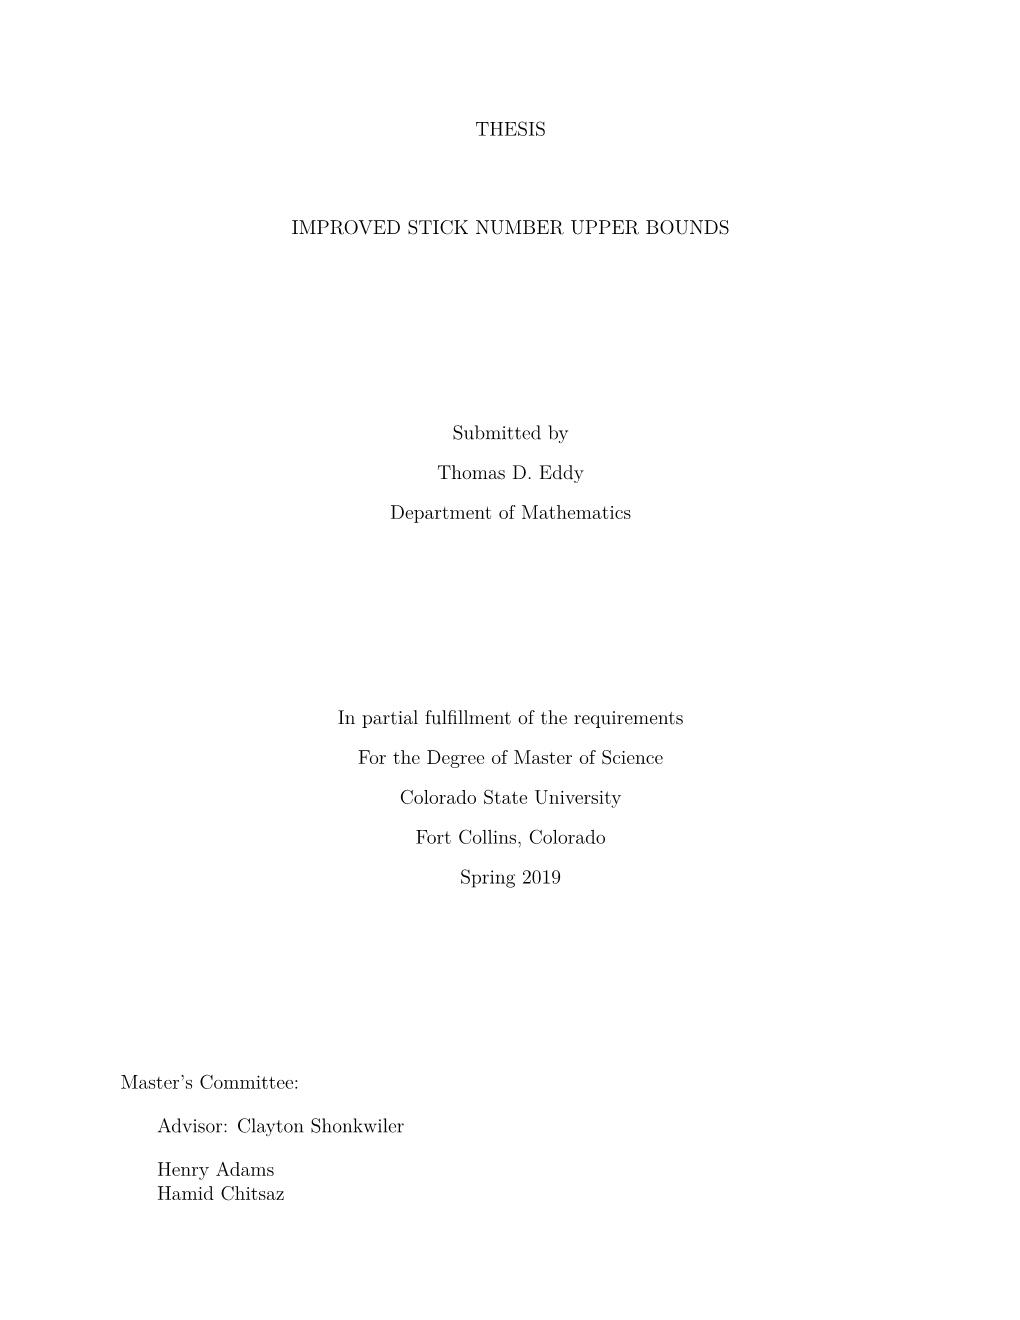 THESIS IMPROVED STICK NUMBER UPPER BOUNDS Submitted by Thomas D. Eddy Department of Mathematics in Partial Fulfillment of the Re